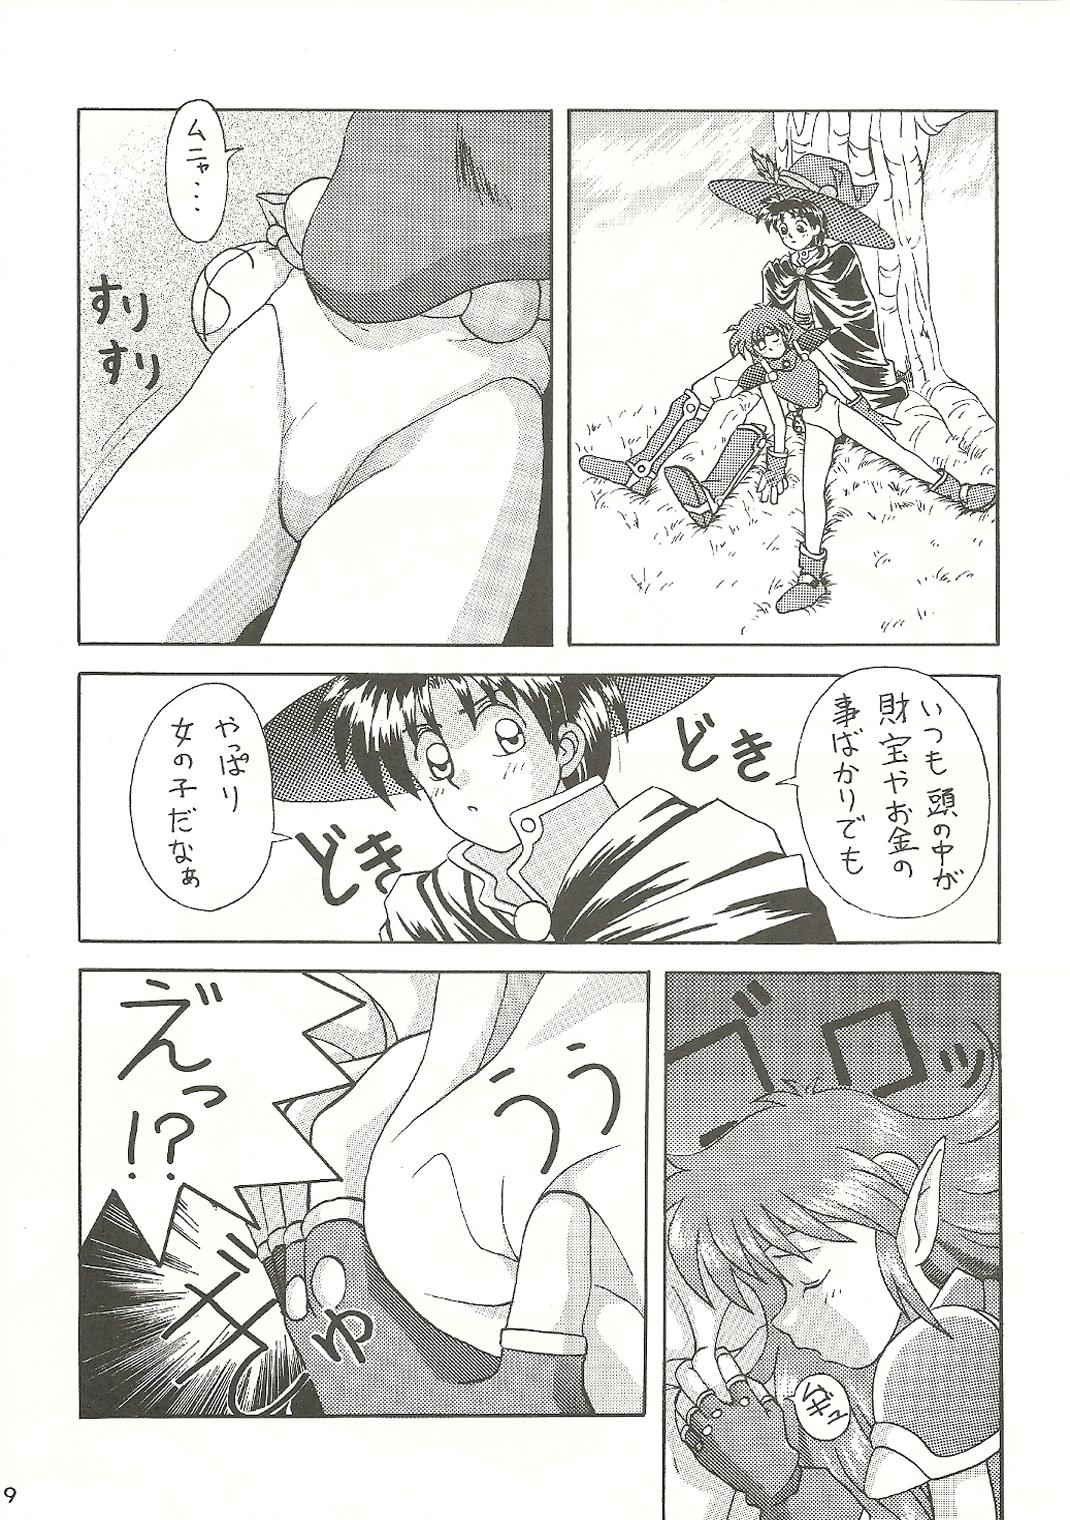 Cousin R URABON 3 - Twinbee Shining force Popful mail Blows - Page 8